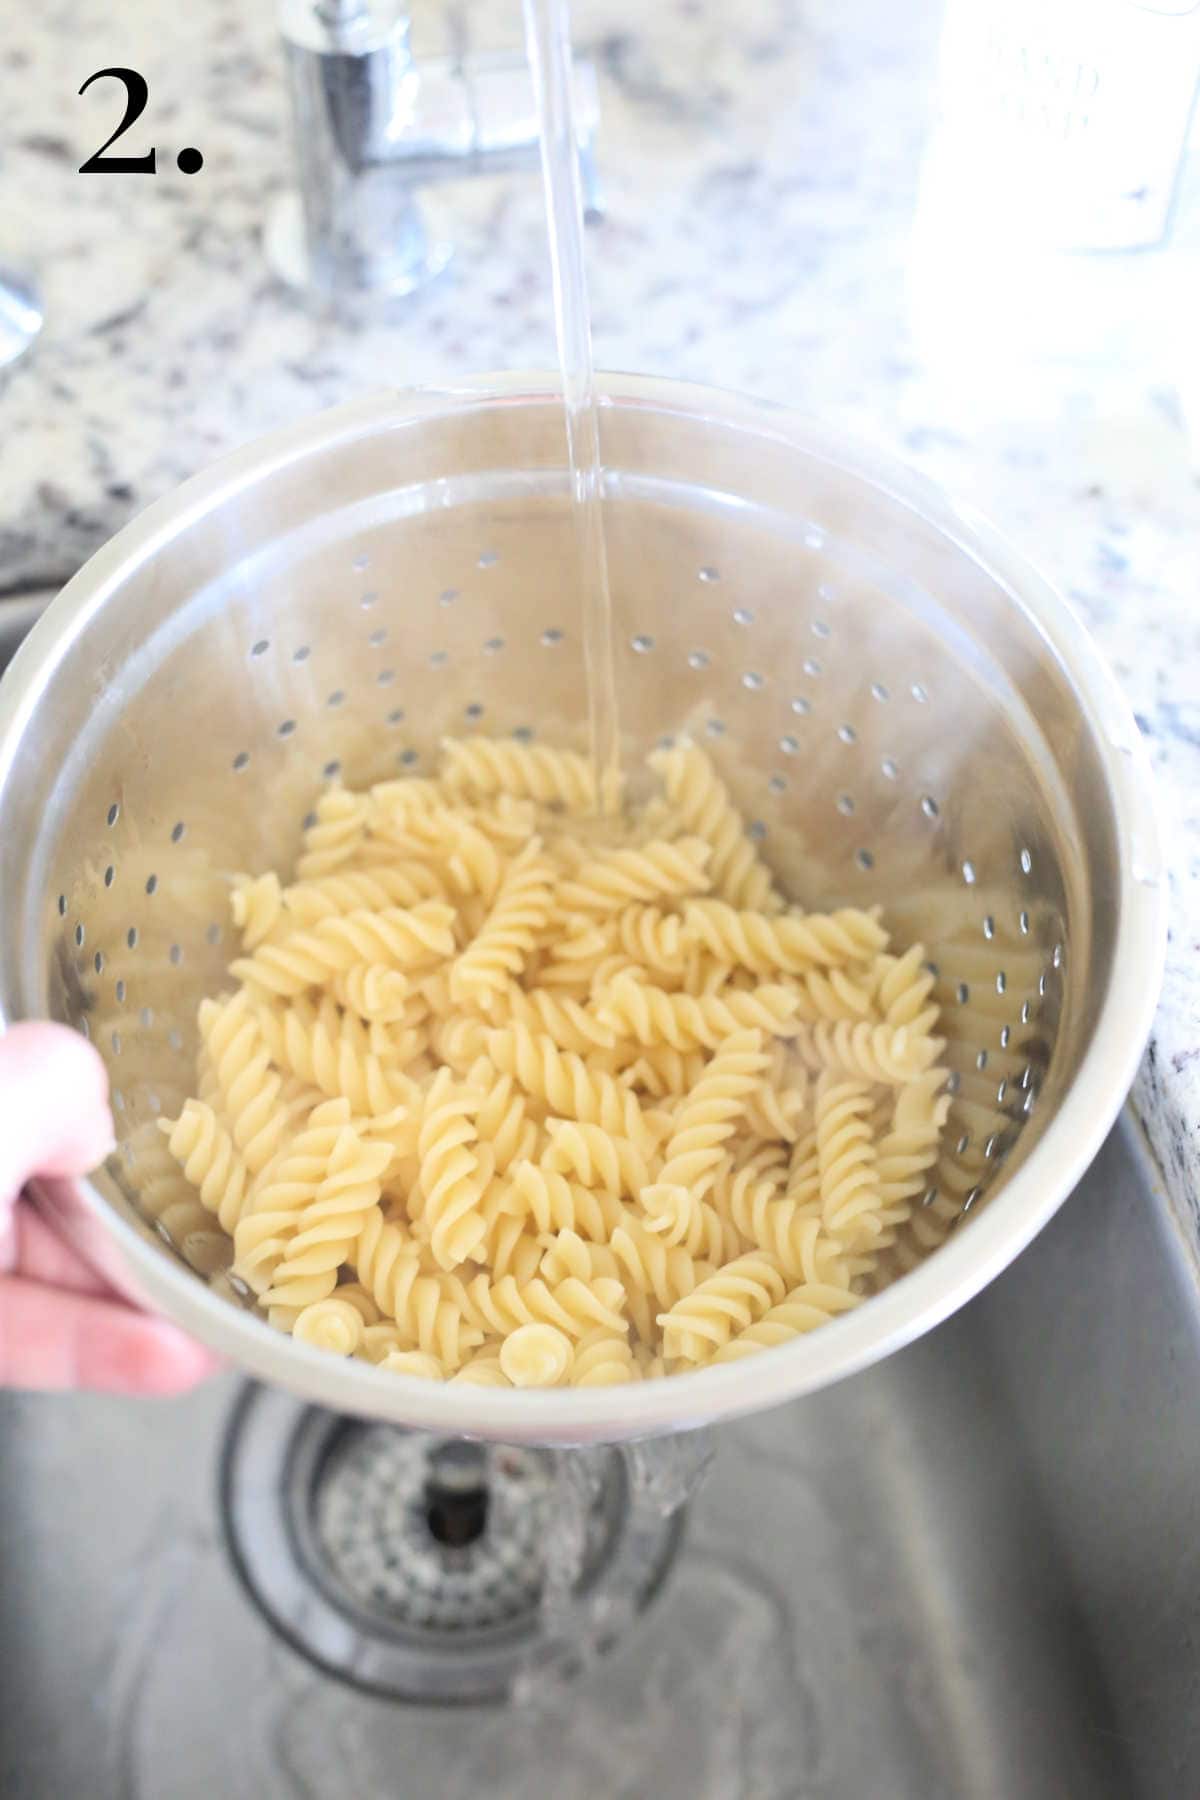 Rinsing cooked pasta noodles with cold water in the sink.